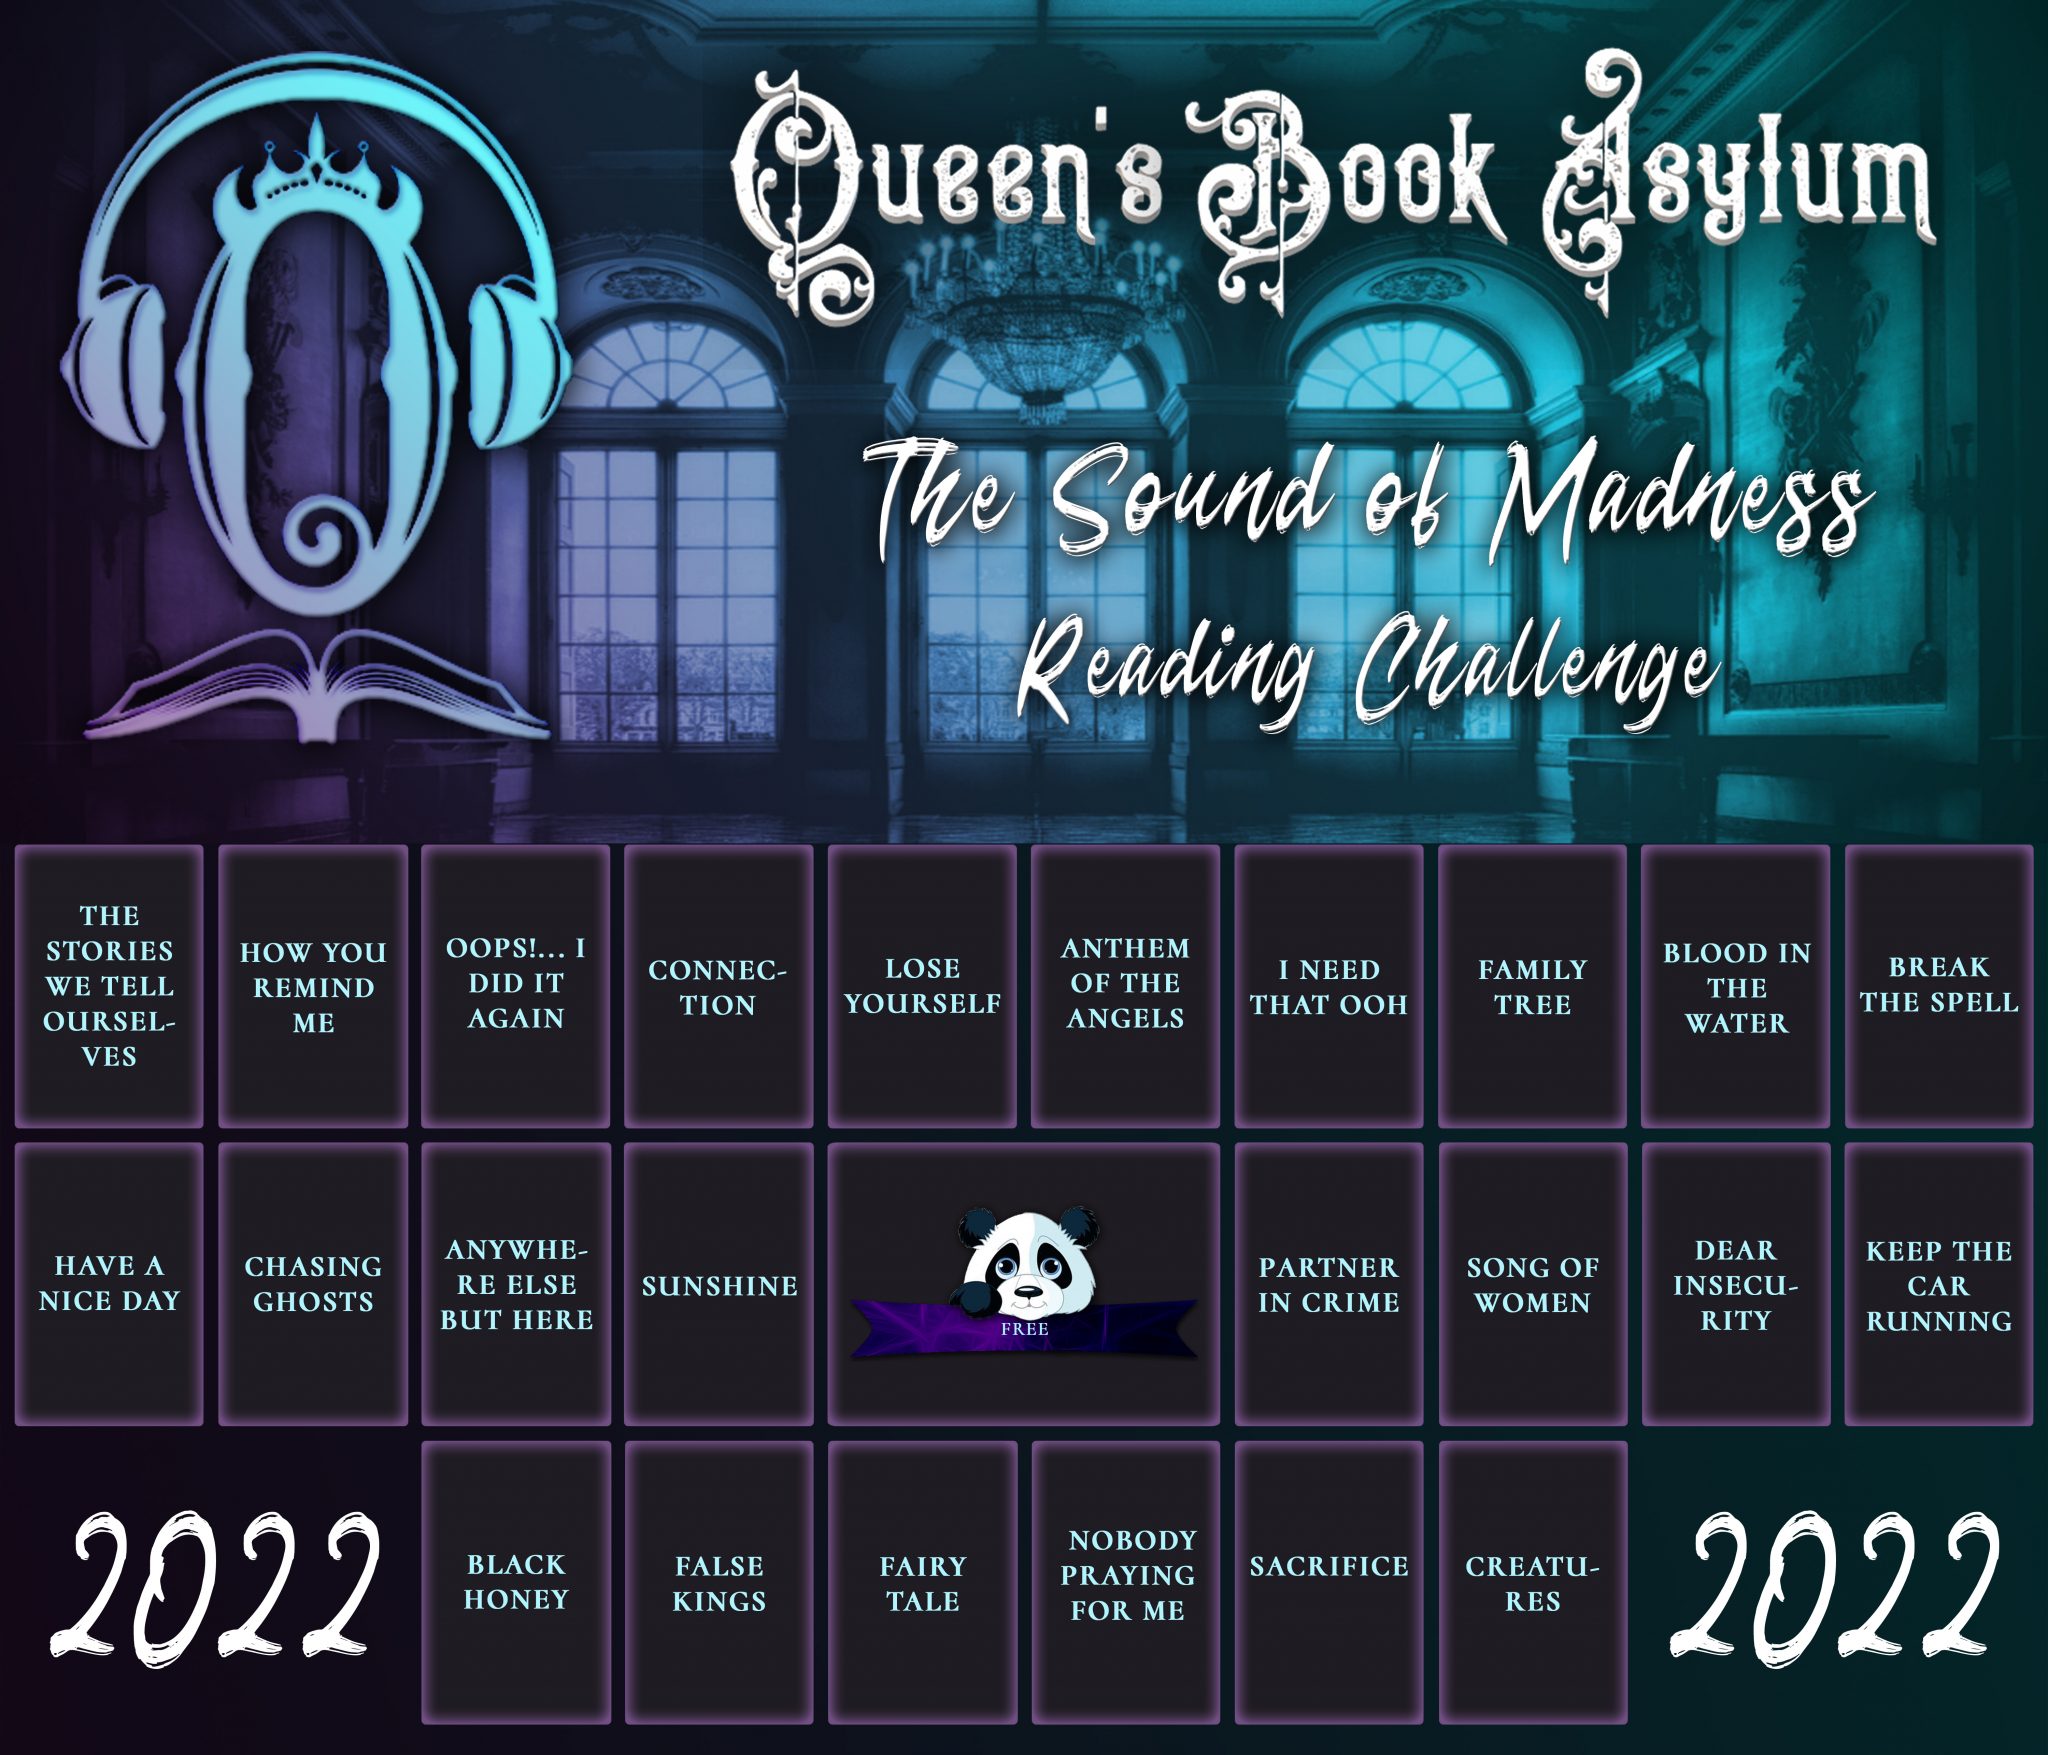 The Sound of Madness Reading Challenge card 2022